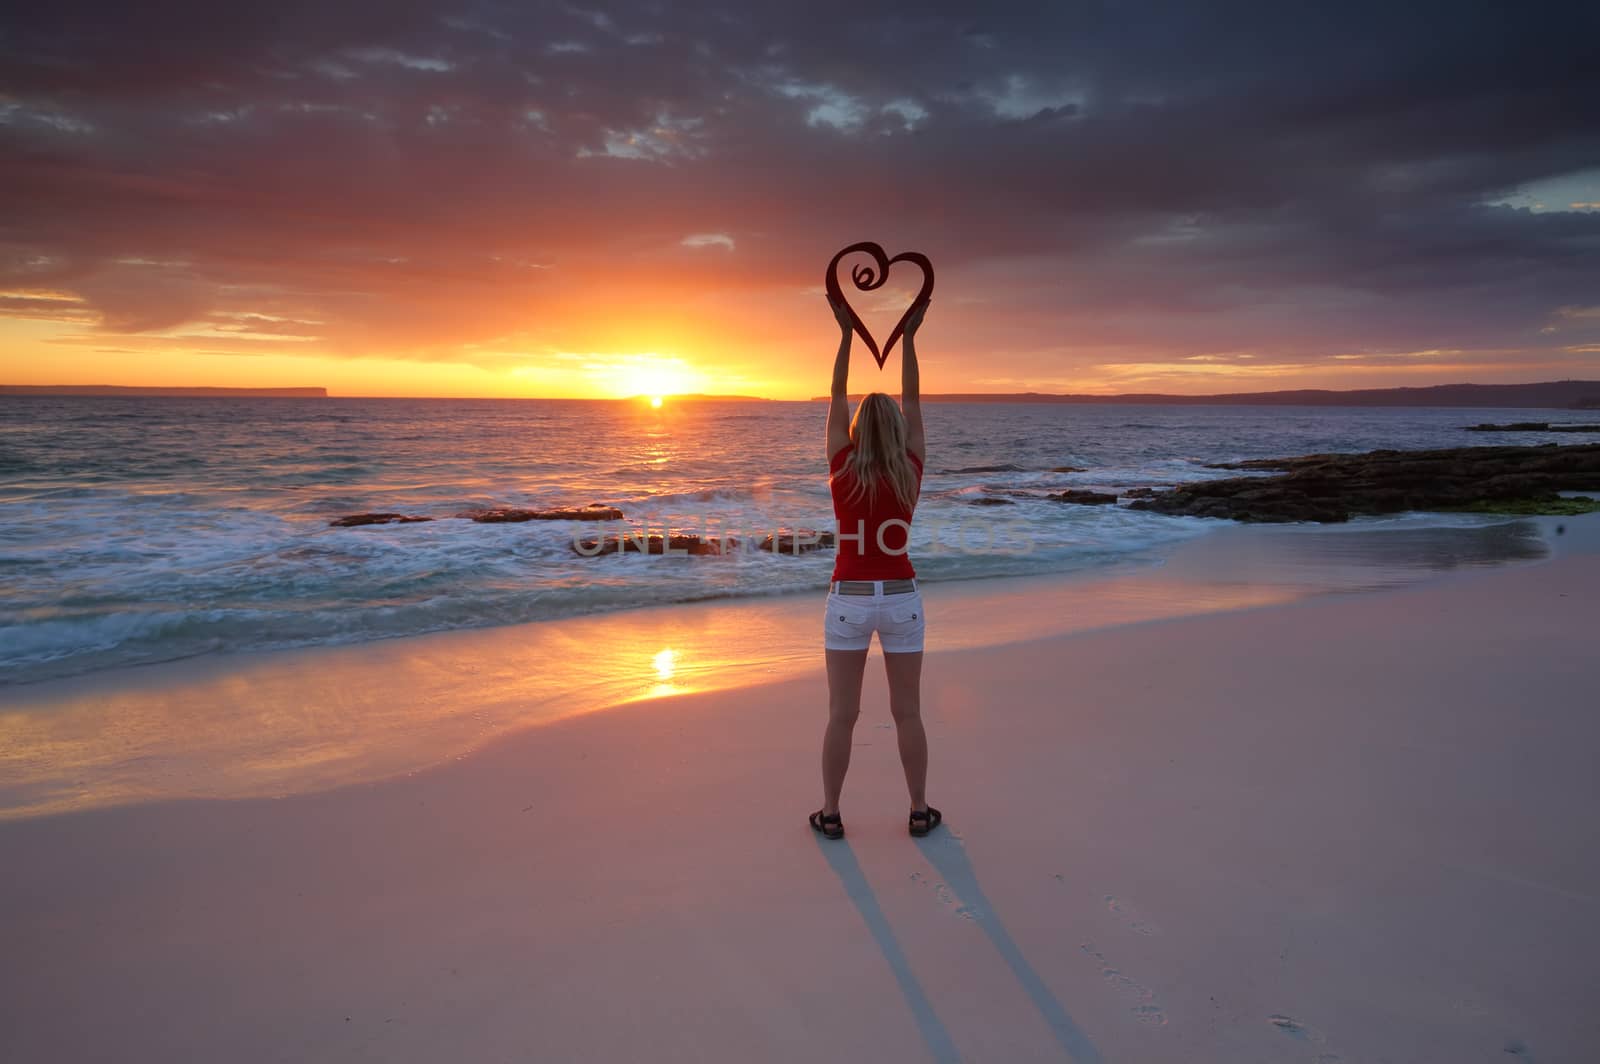 Love Jervis Bay Australia ezpecially when the sunrise is as good as this one casting a red orange glow into the sky and across the water and the usual white sands giving everything a red glow.  Woman holds a red heart above her head